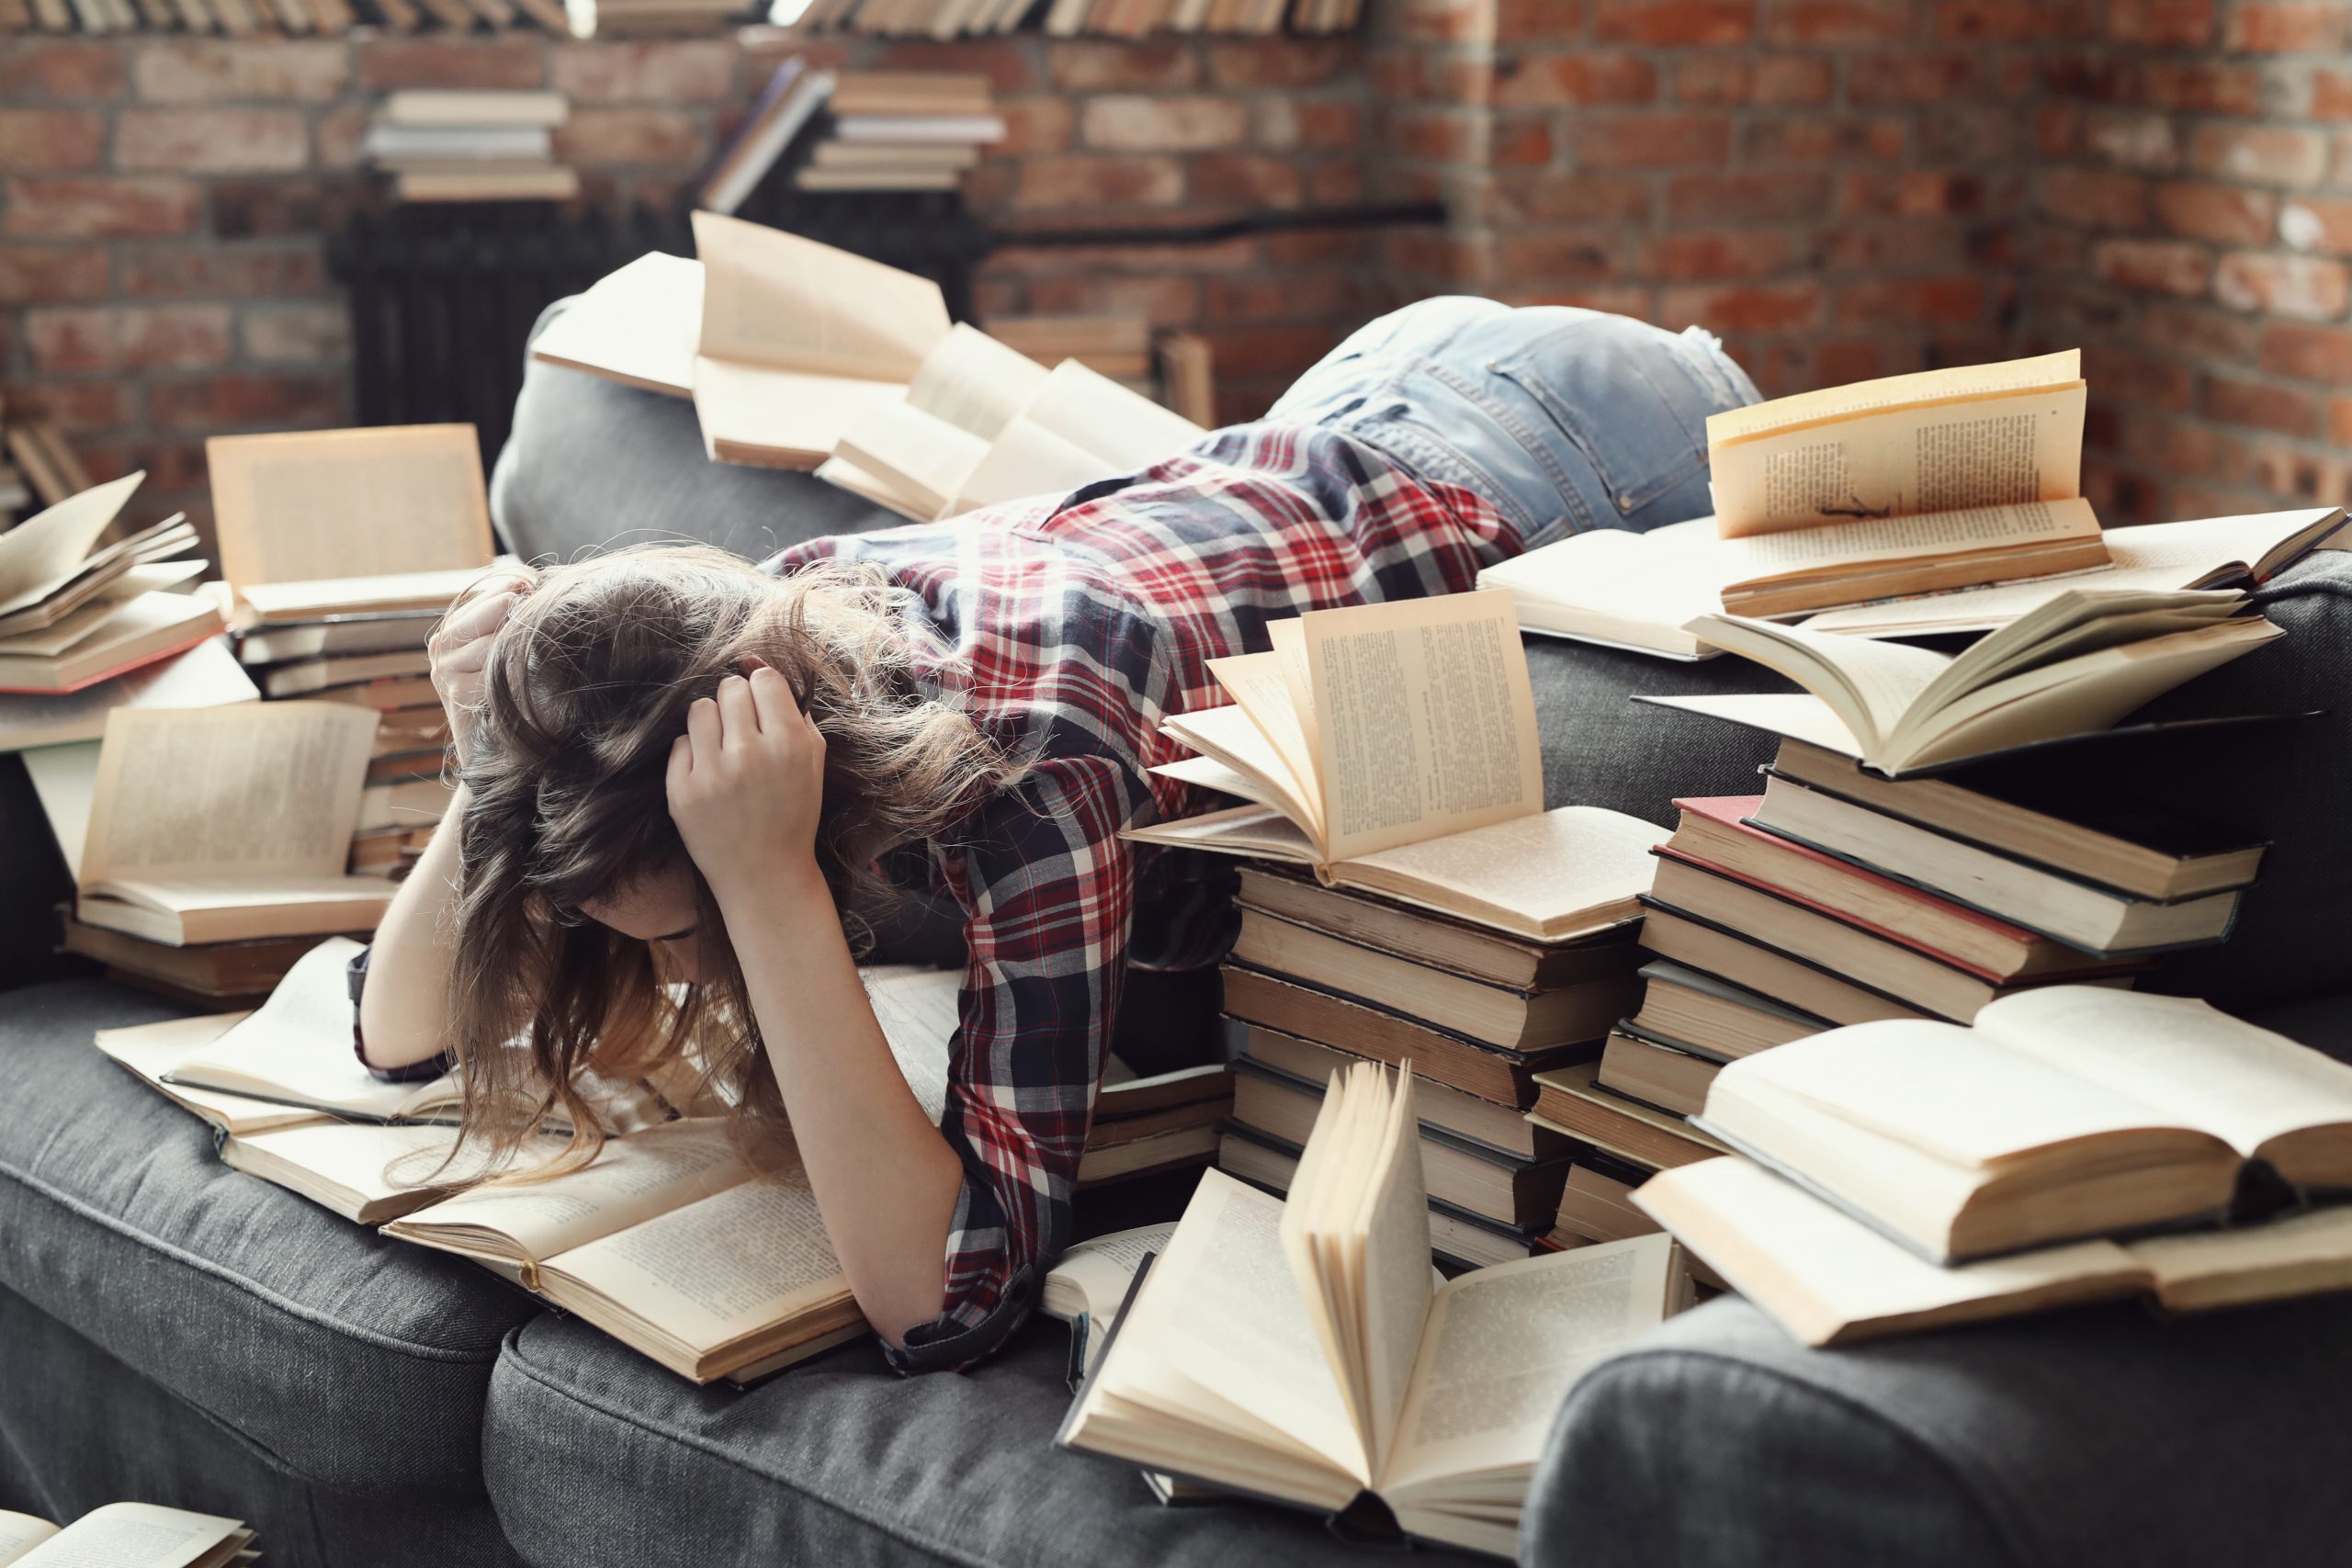 Girl busy reading a book in a cluttered space with books